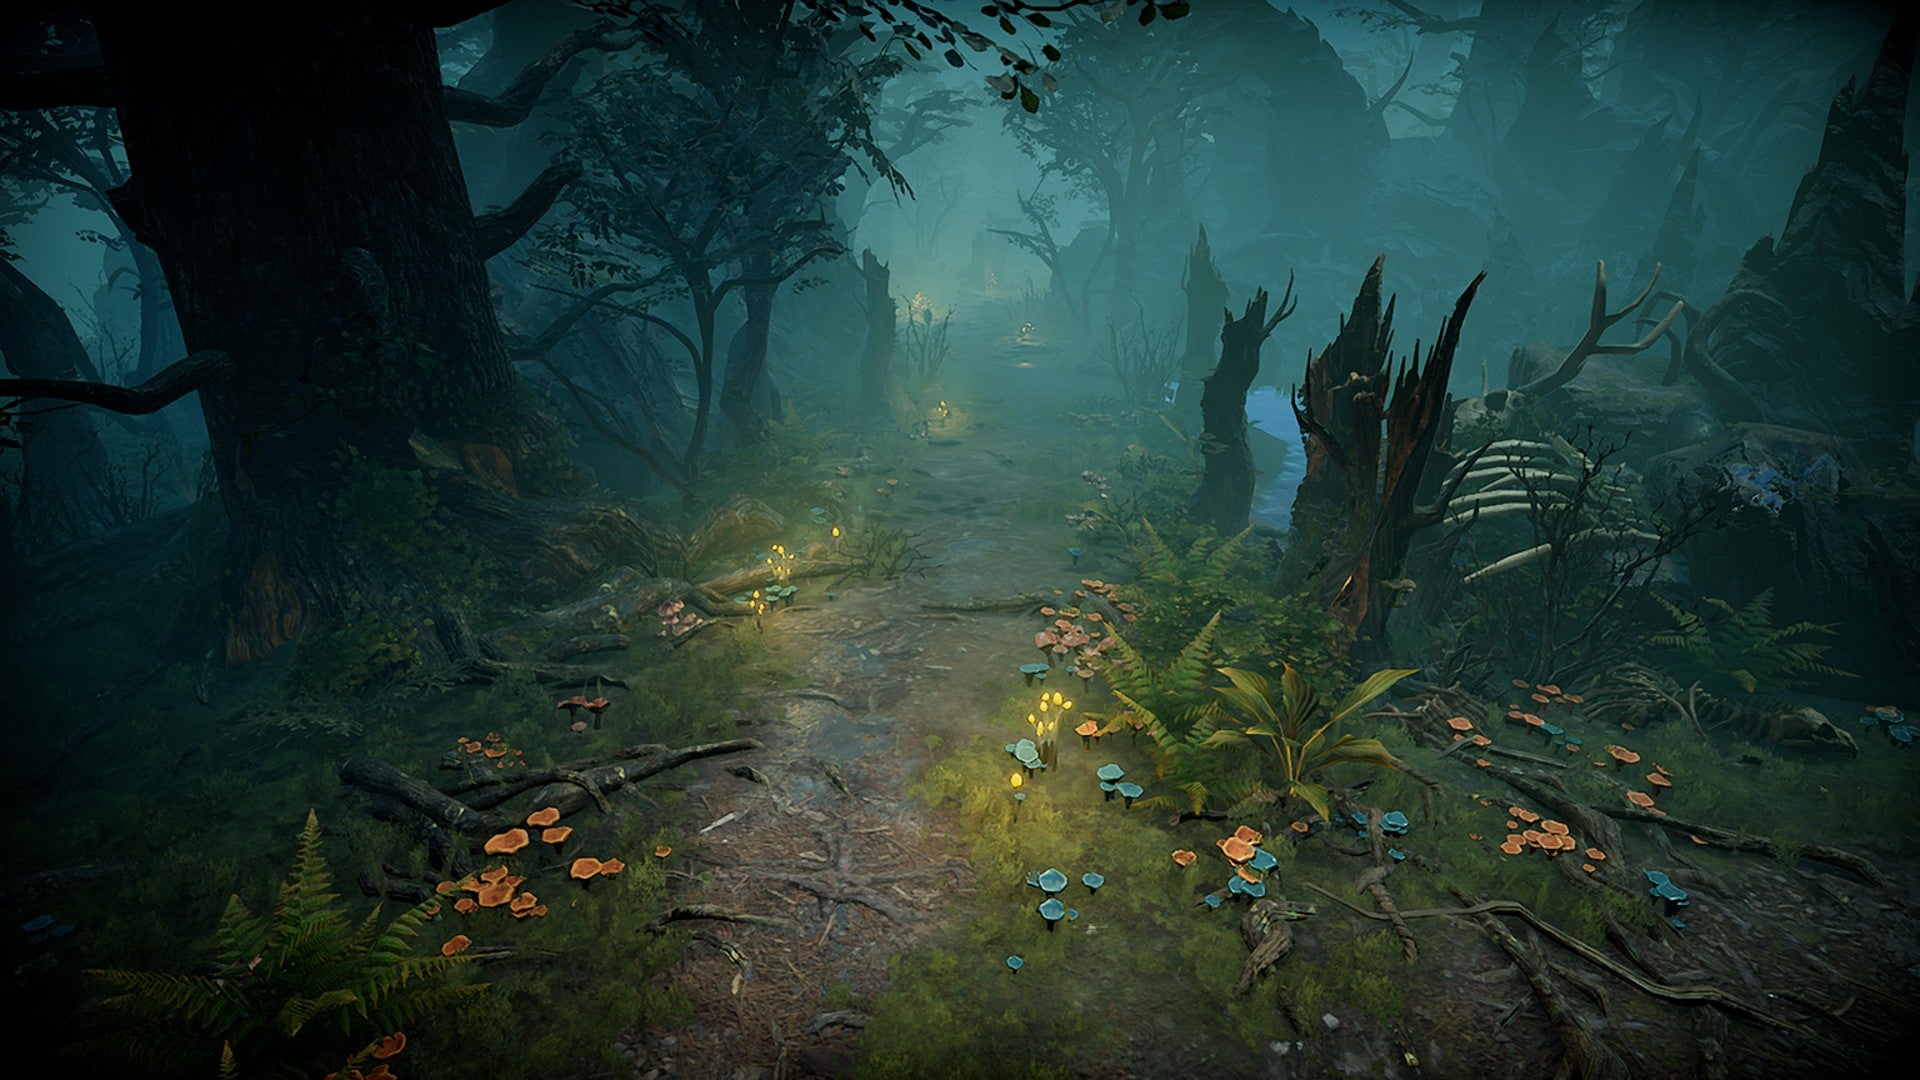 V Rising image showing a murky forest with mushrooms growing across the ground